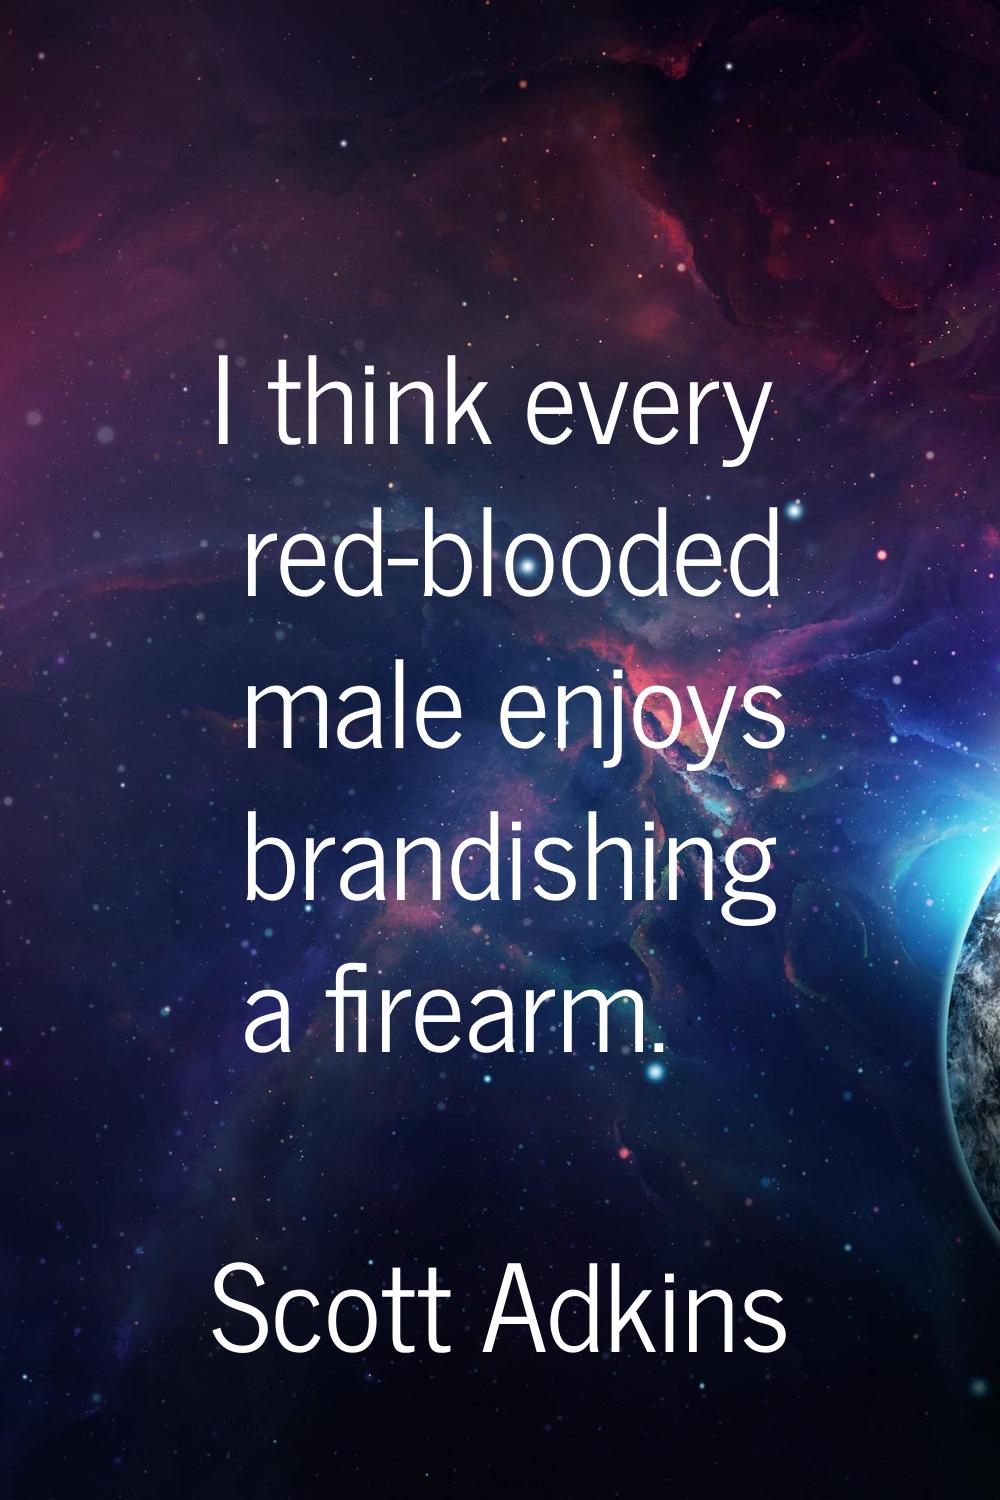 I think every red-blooded male enjoys brandishing a firearm.